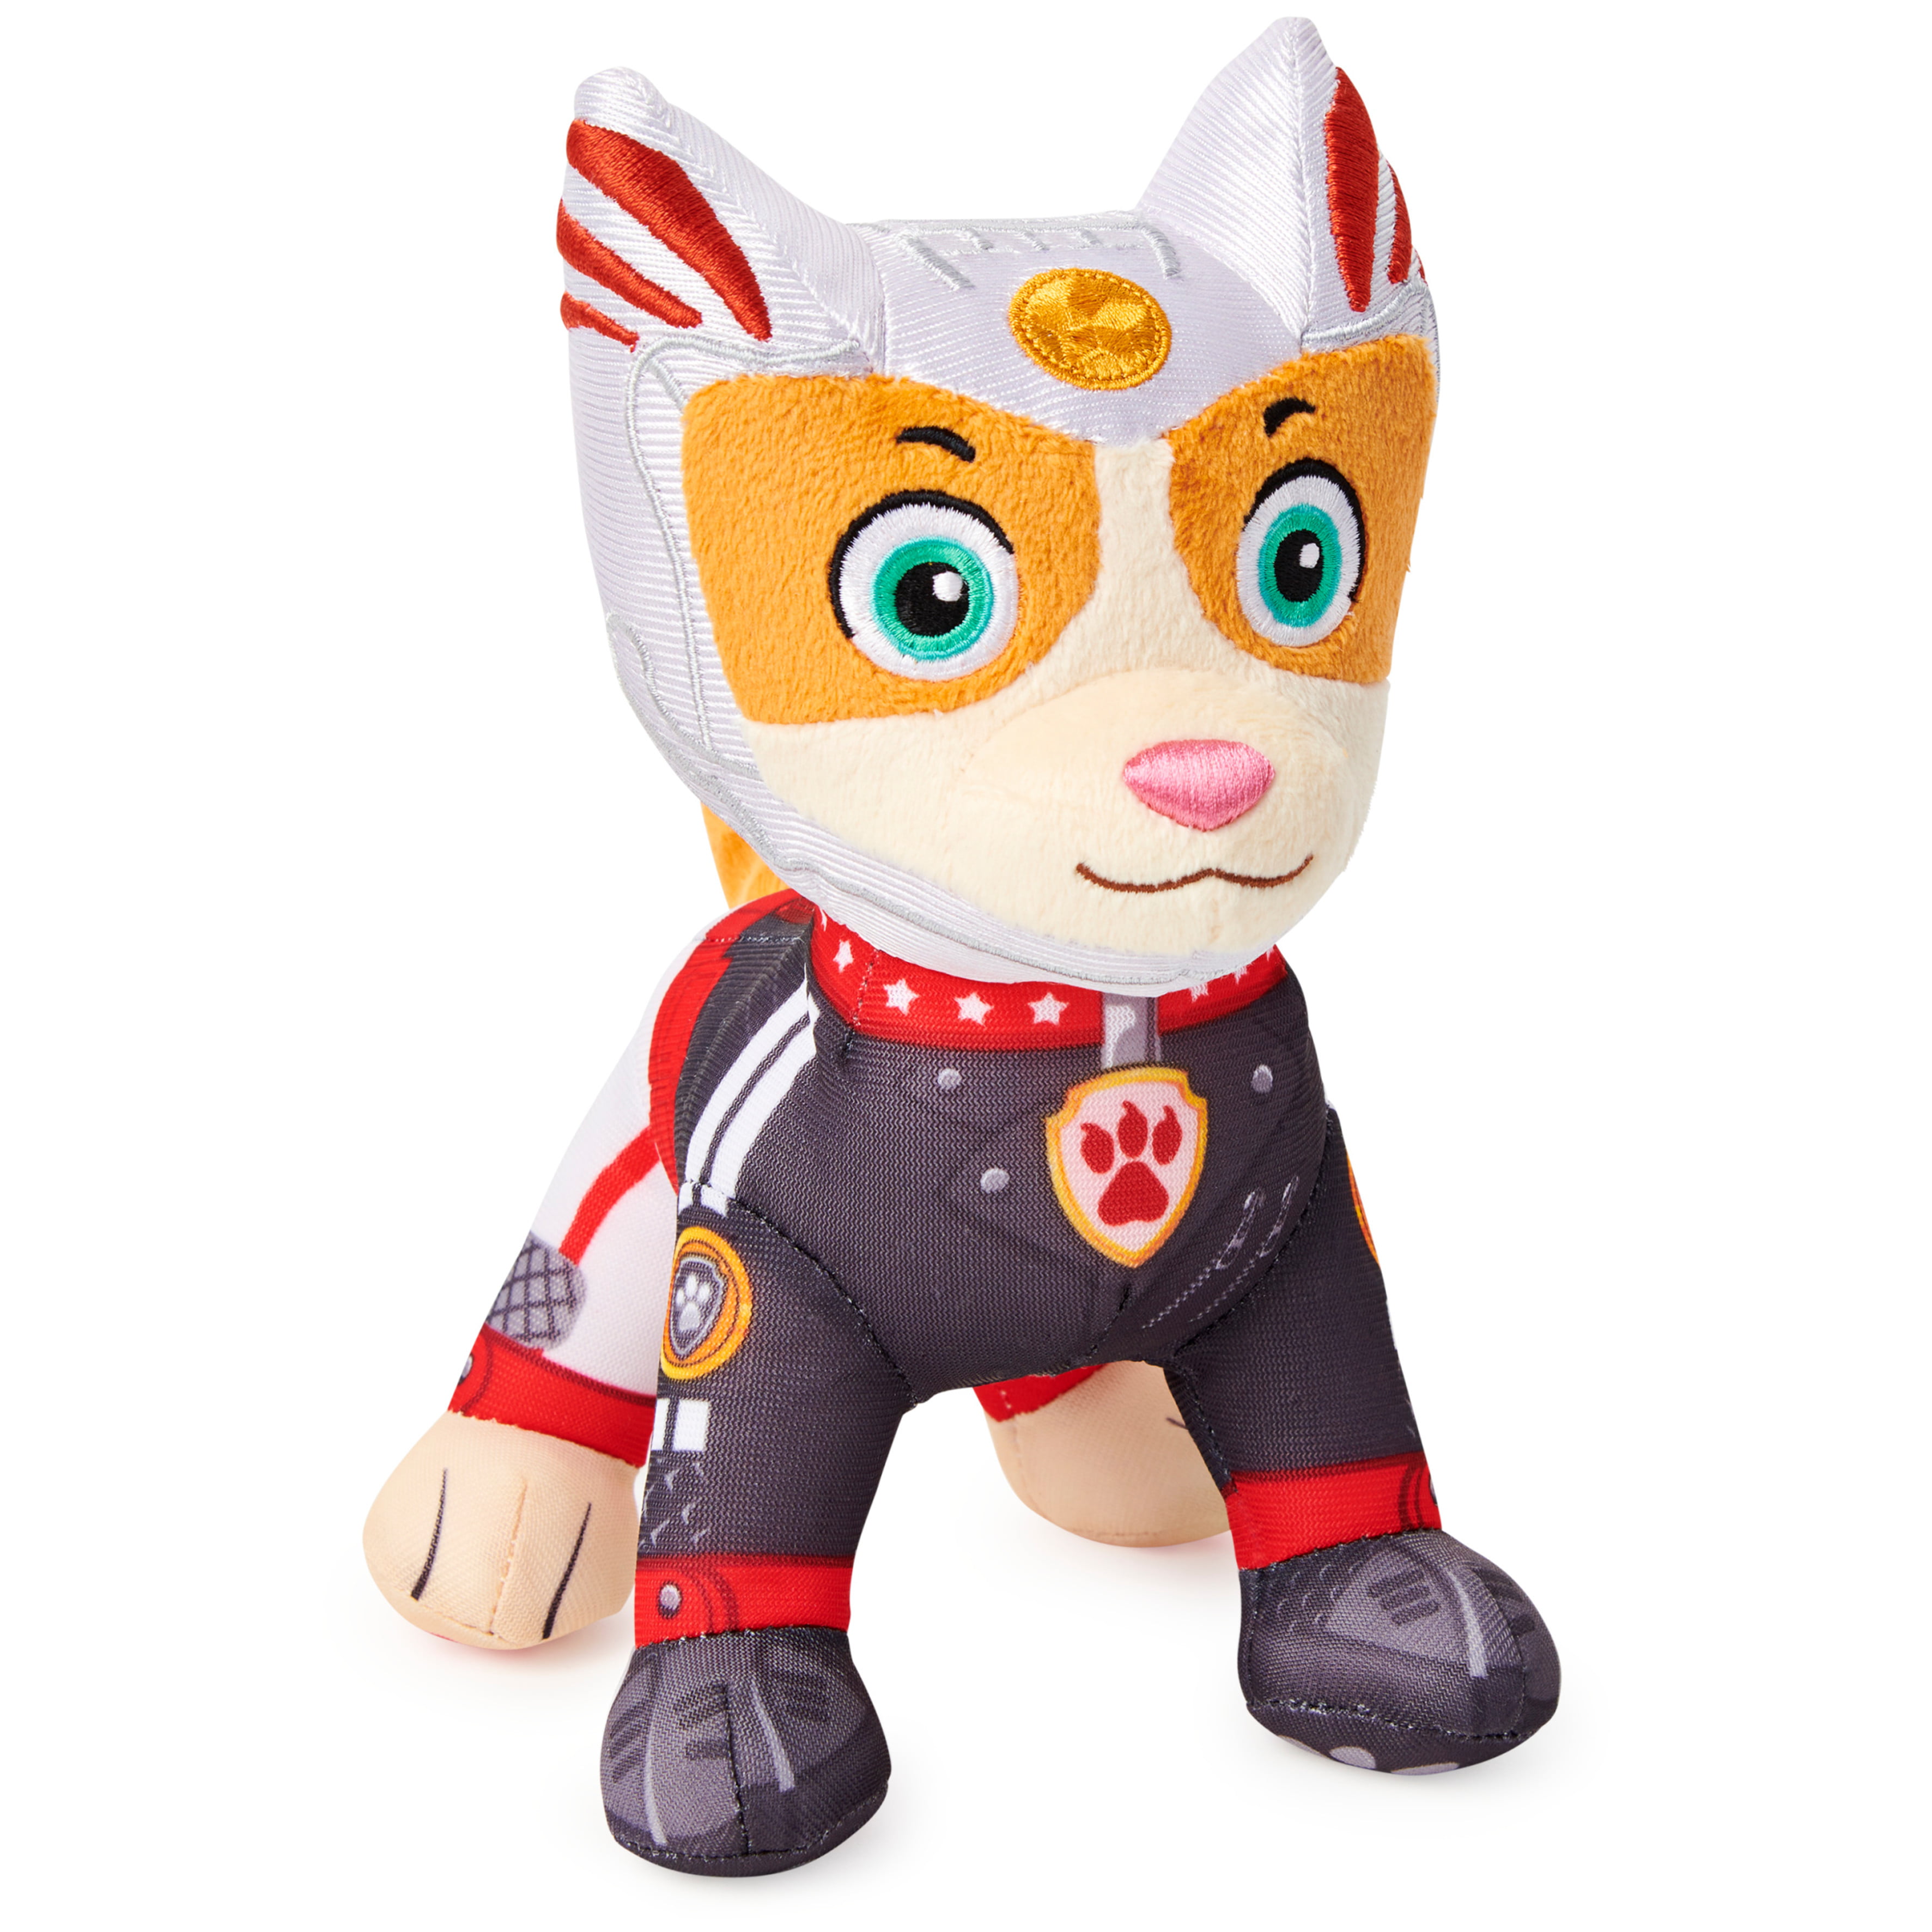 PAW Patrol, Moto Pups Wildcat, Stuffed Animal Plush Toy, 8 Inch, For Kids Aged 3 And Up